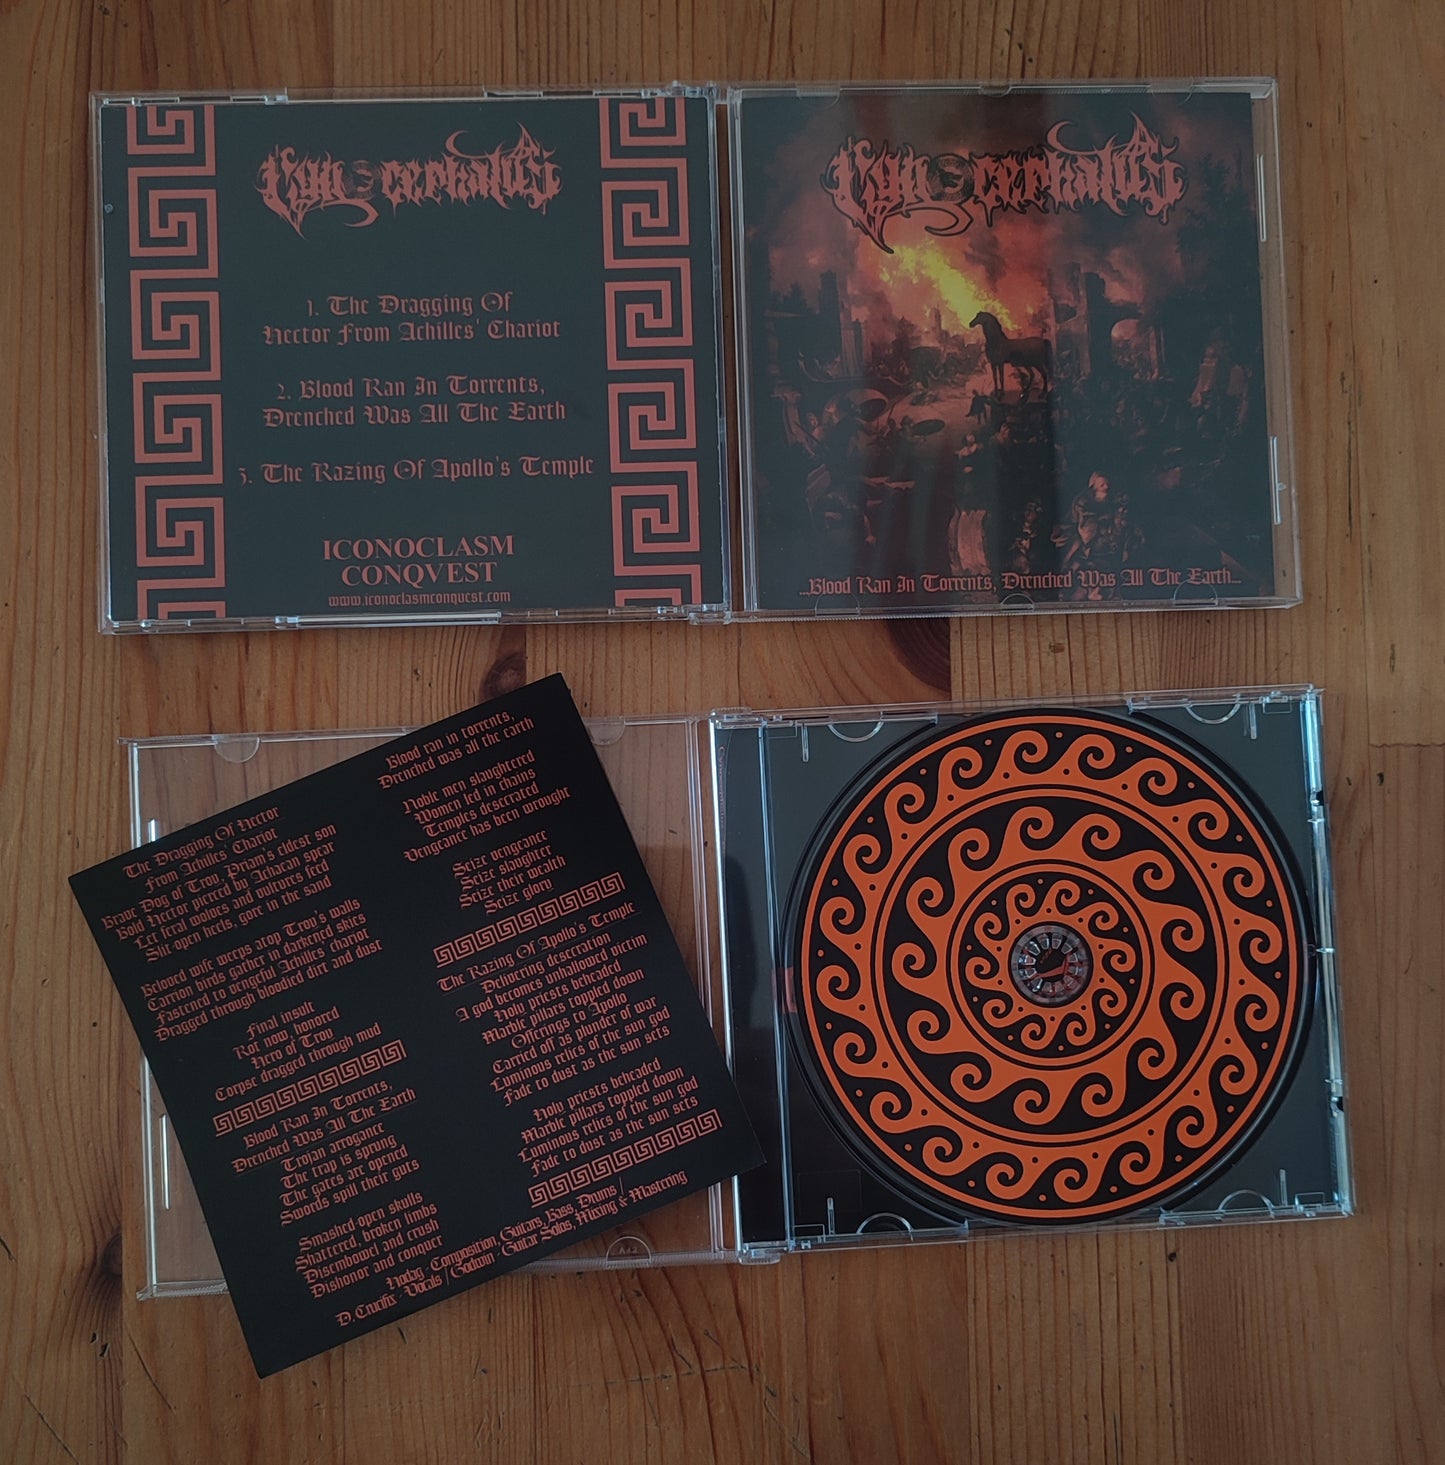 Cynocephalus (Int) "...Blood Ran In Torrents, Drenched Was All The Earth" - CDs